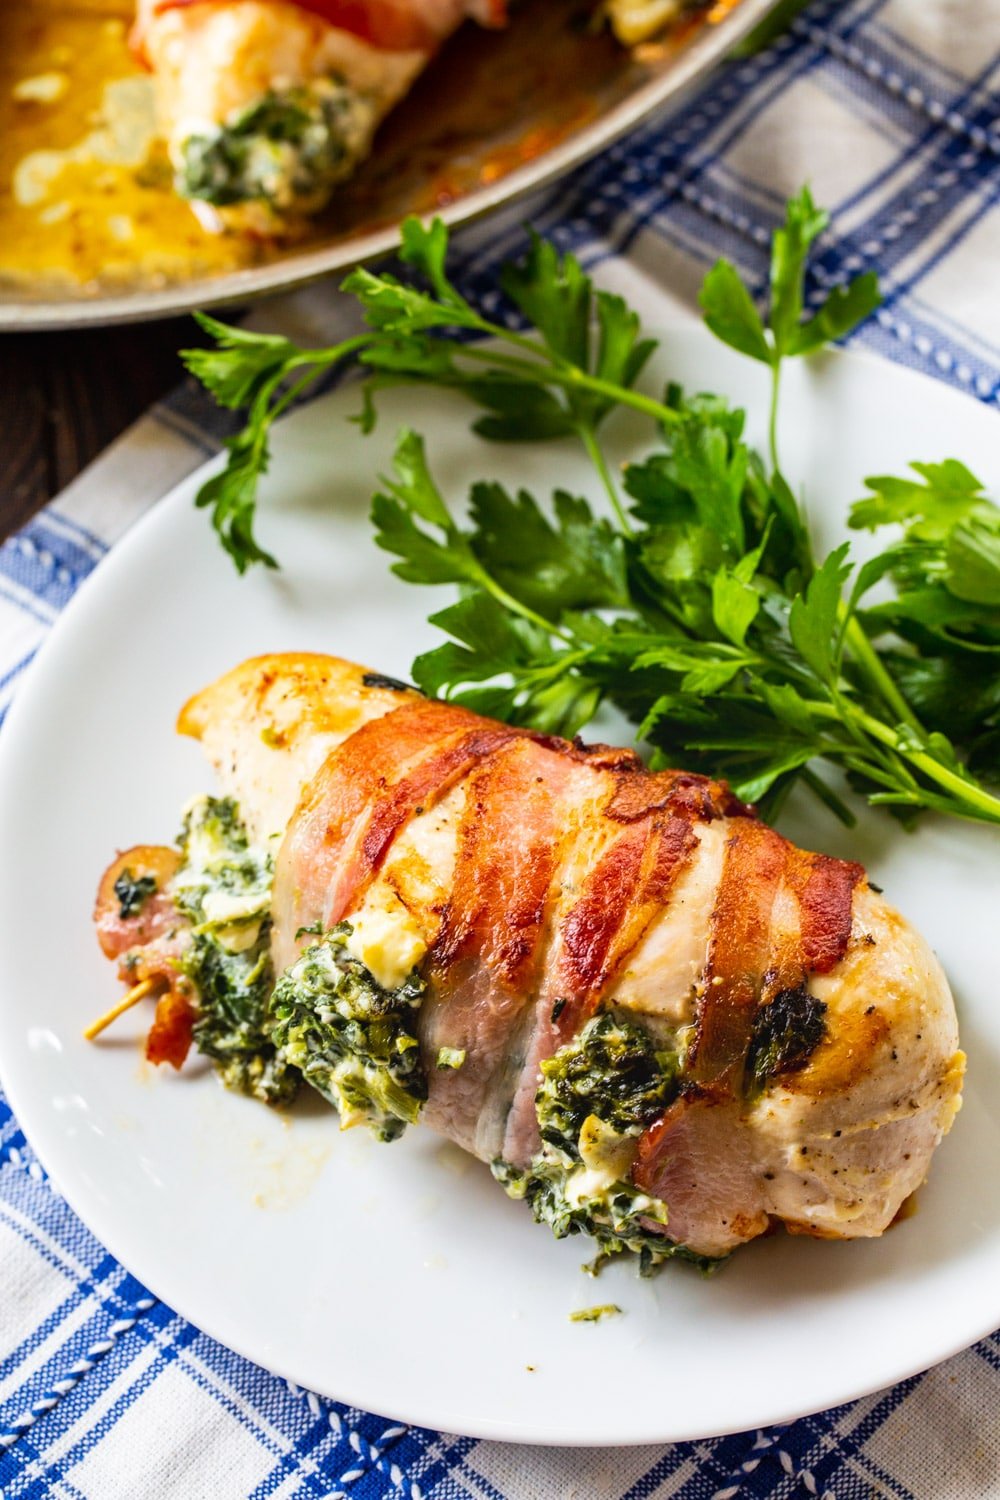 Bacon Wrapped Spinach and Feta Stuffed Chicken breast on a plate.